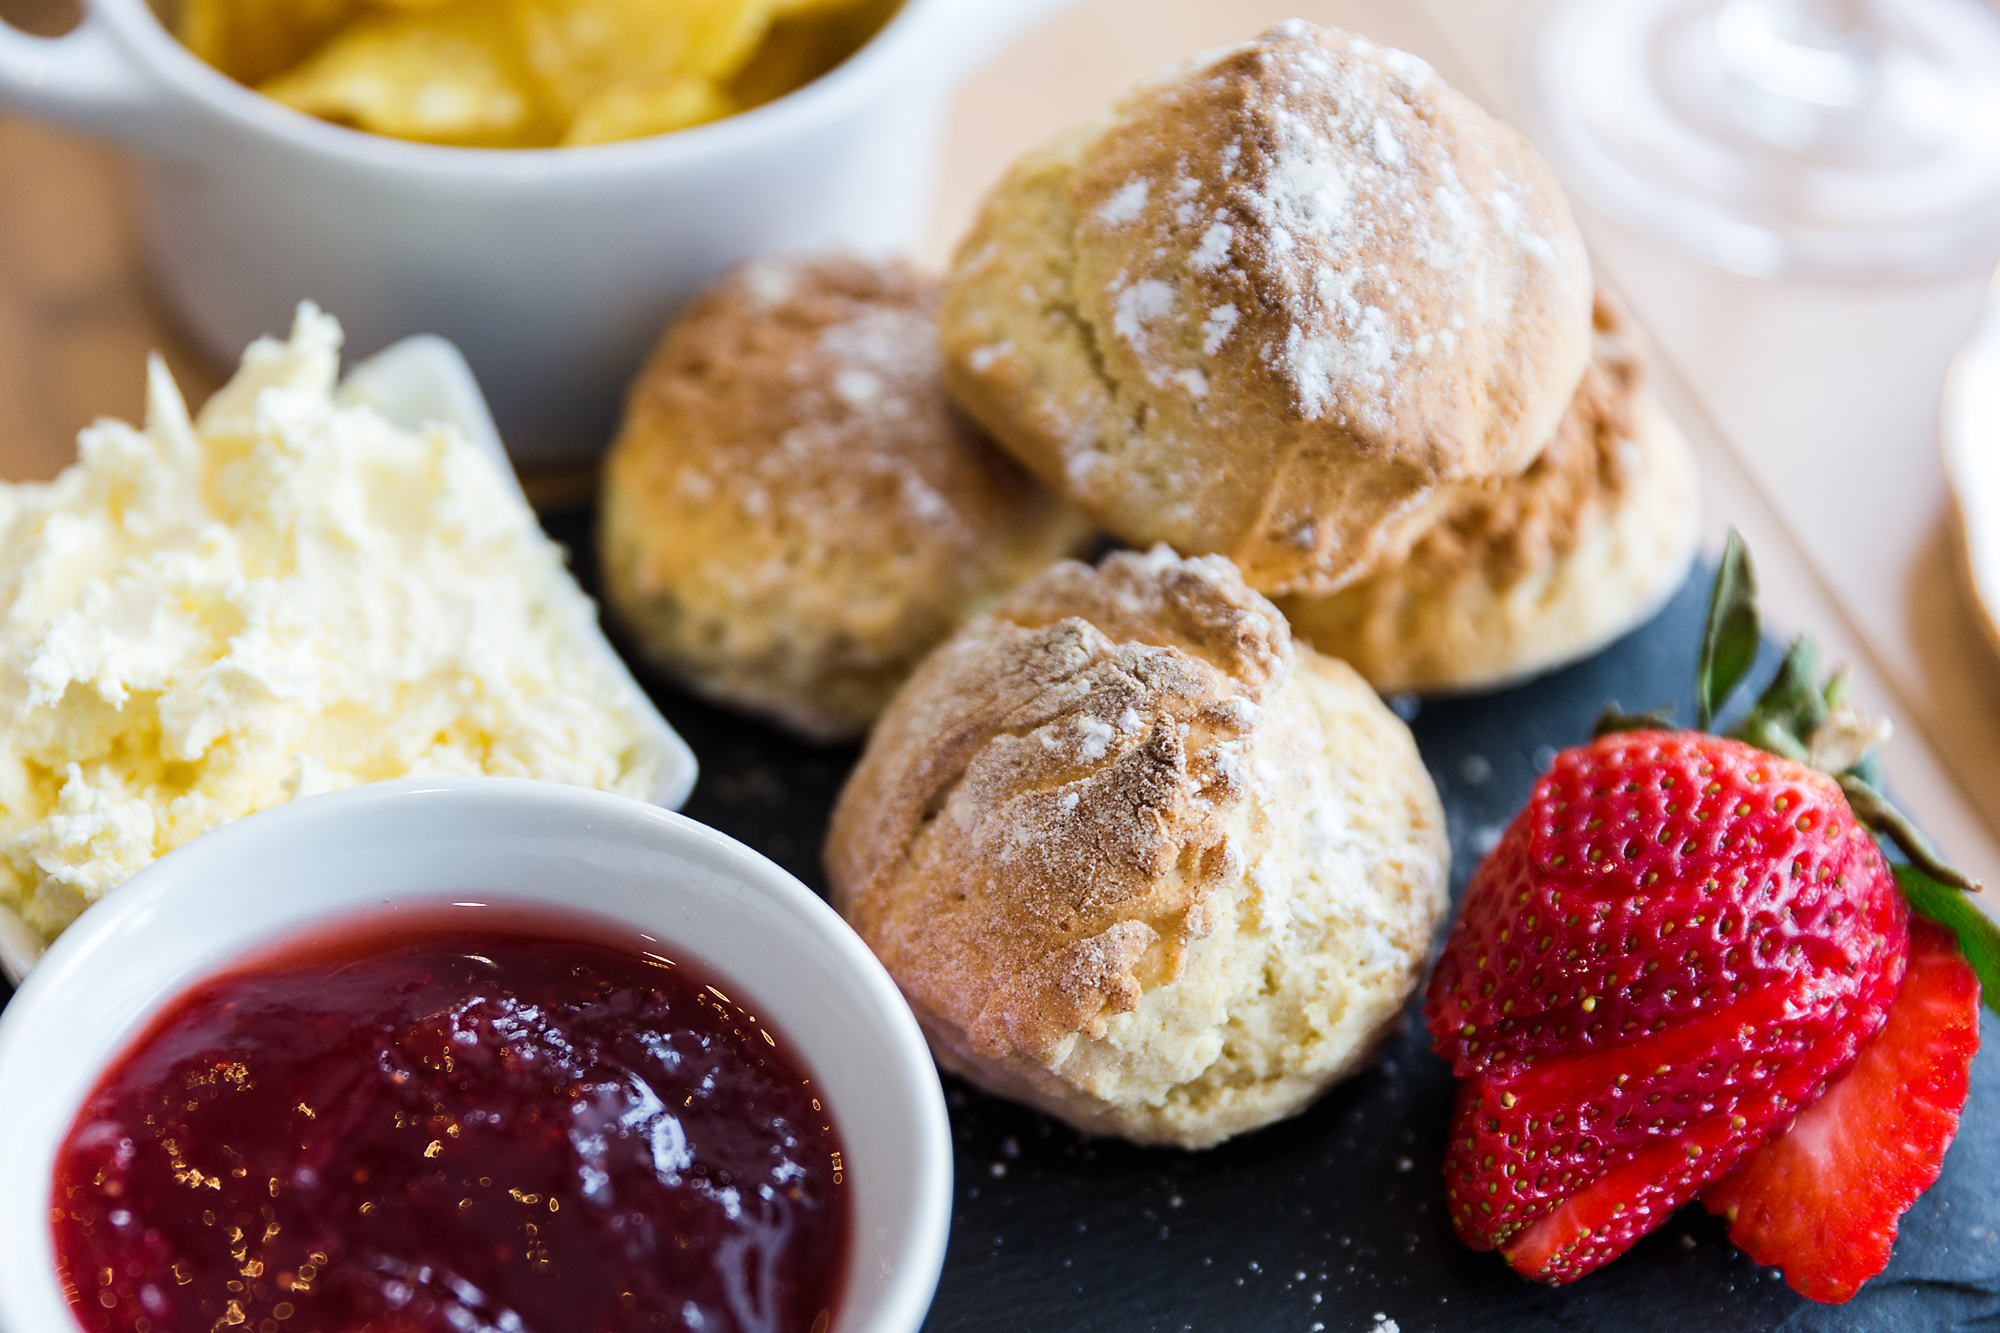 Scones at Miss B's cafe, Bedwas